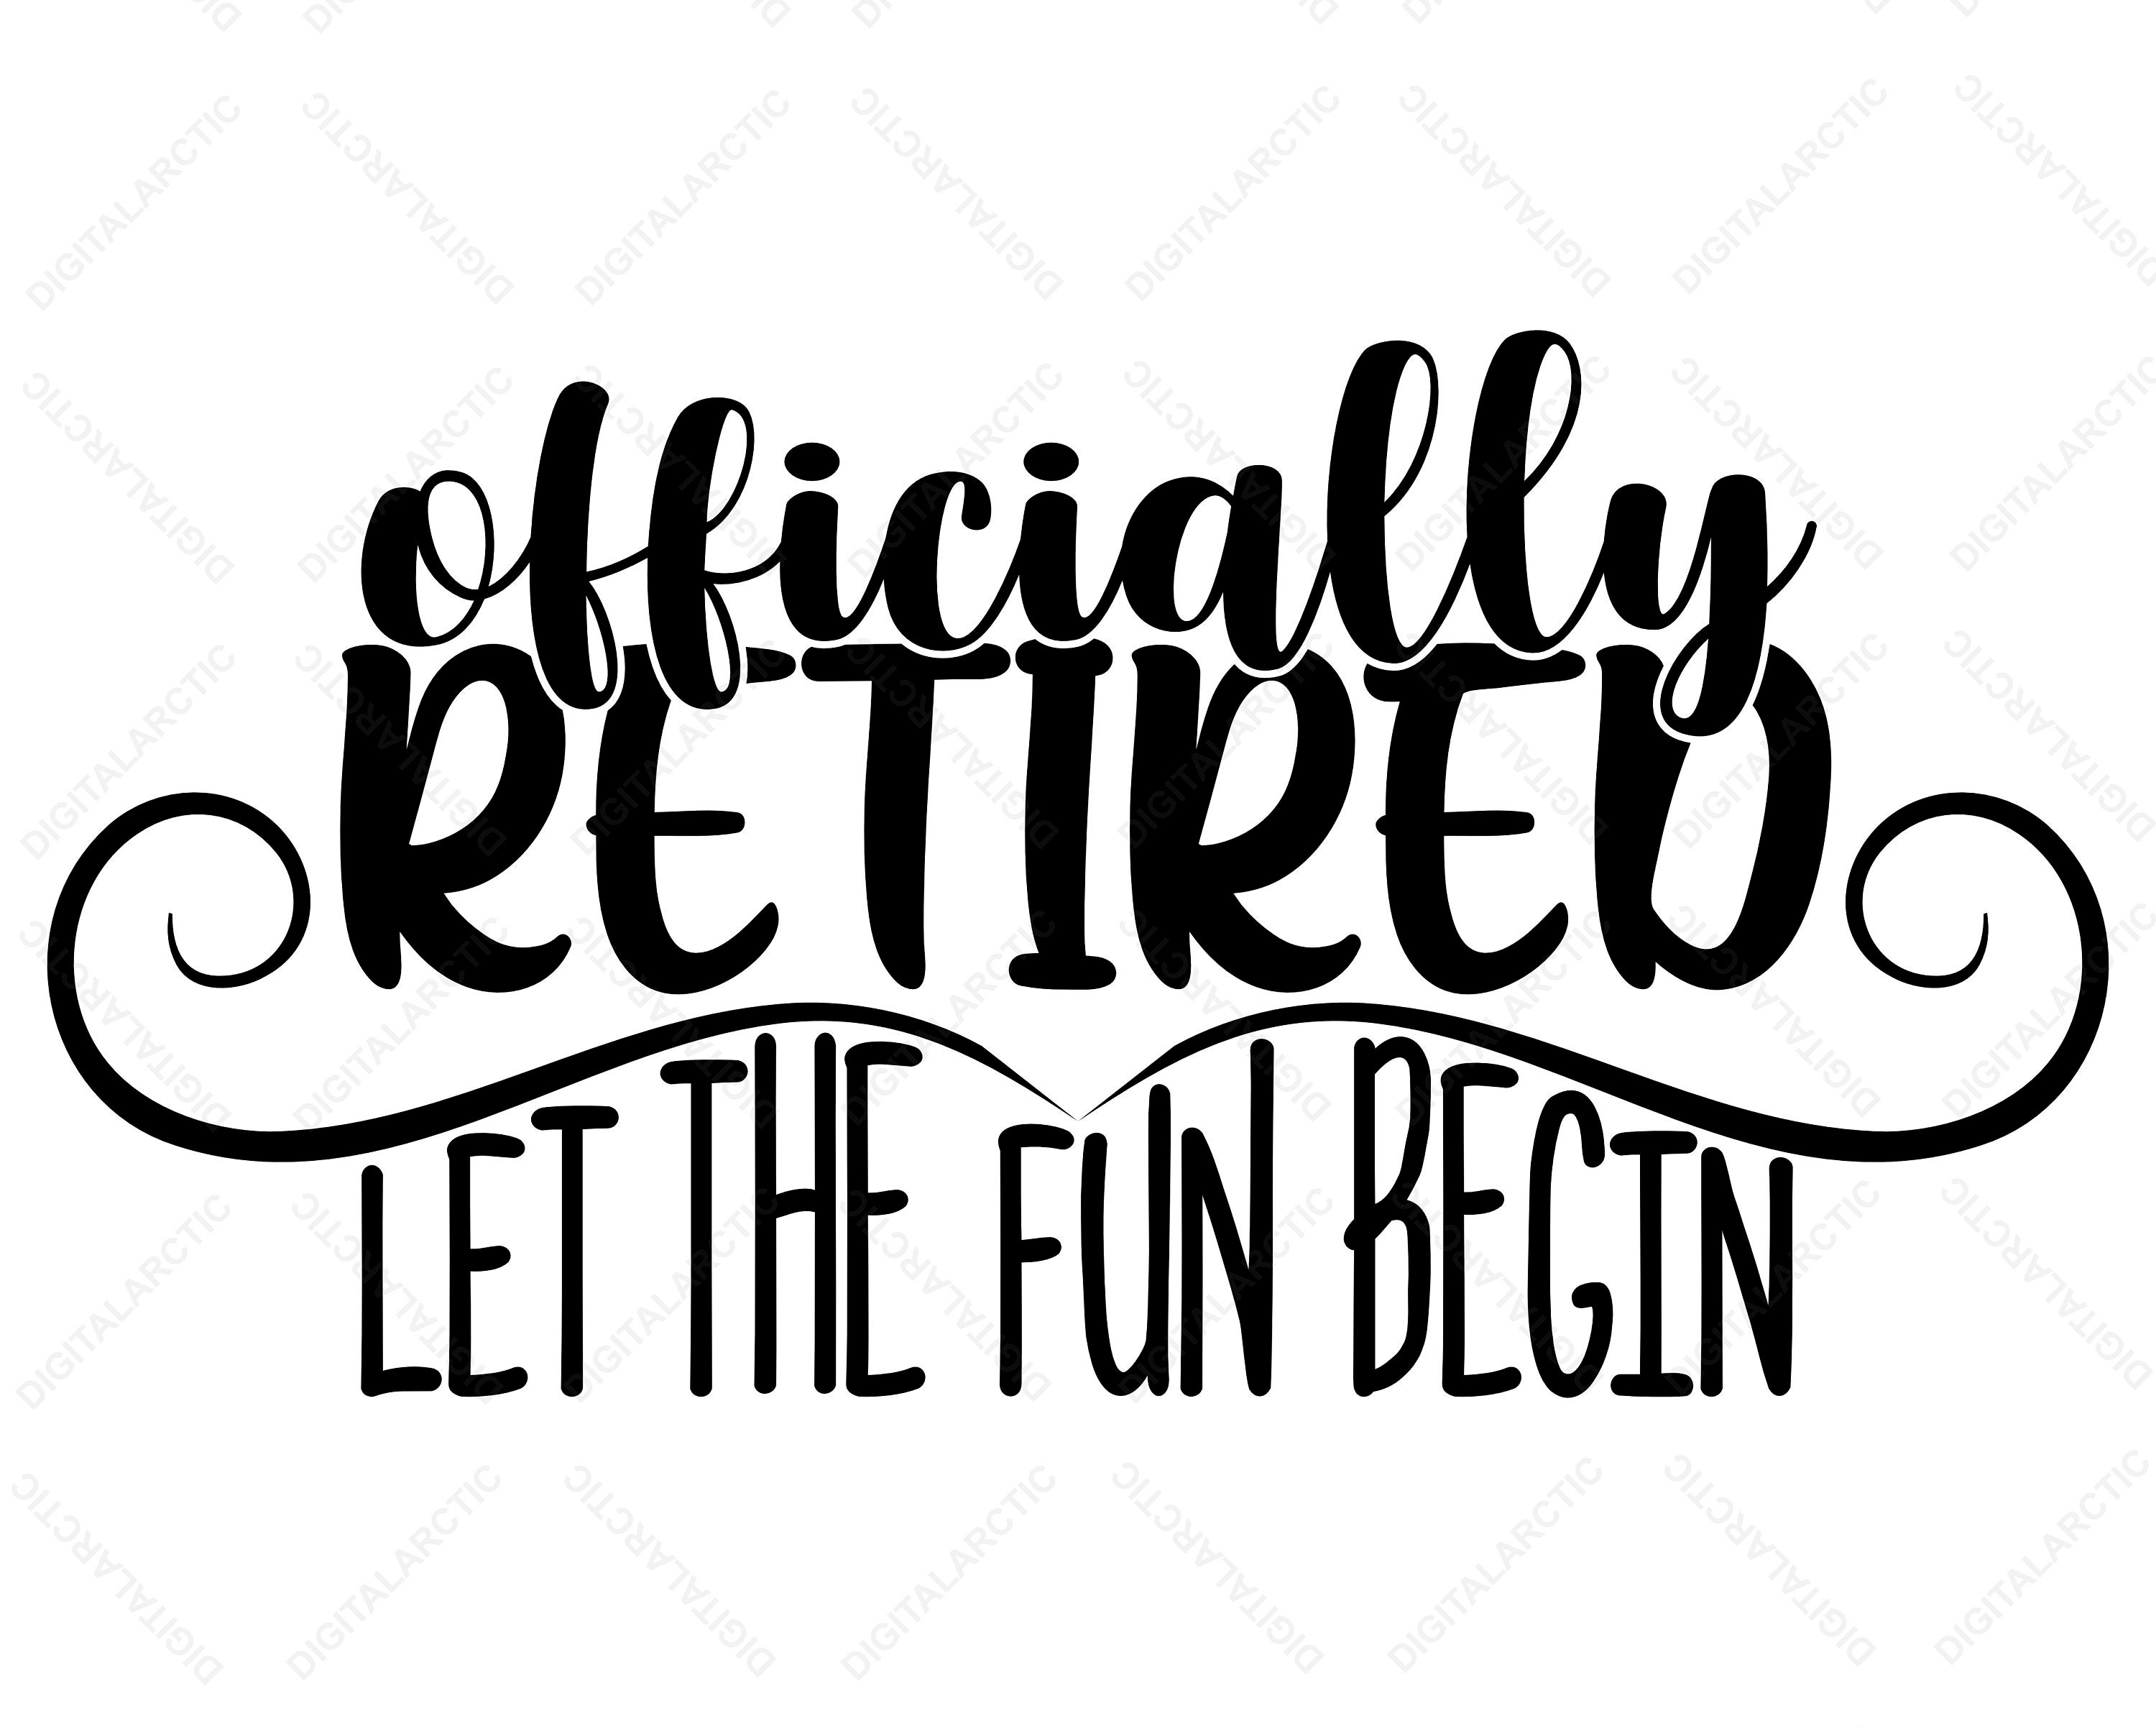 Officially Retired Let the Fun Begin SVG PNG Colorful Funny | Etsy